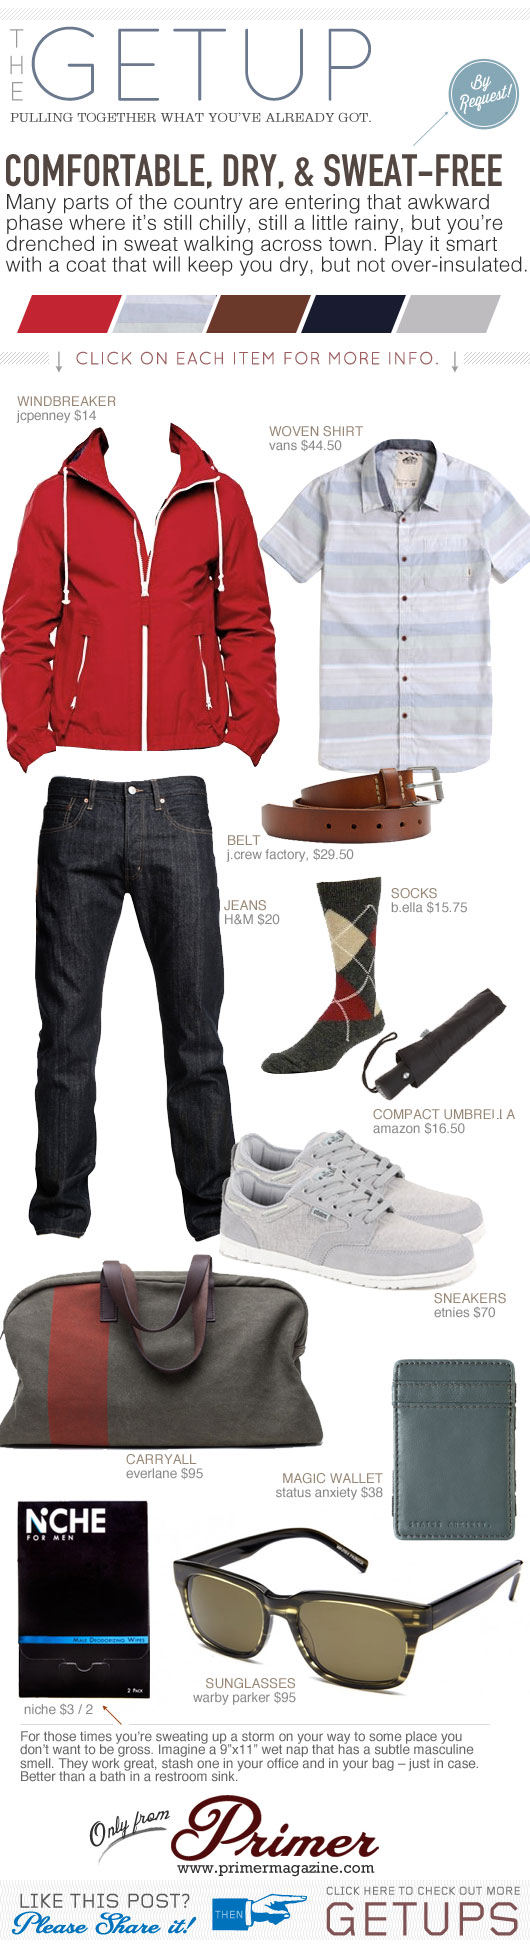 Getup - Comfortable, dry, and sweat-free - red jacket, button up shirt, blue jeans, gray sneakers